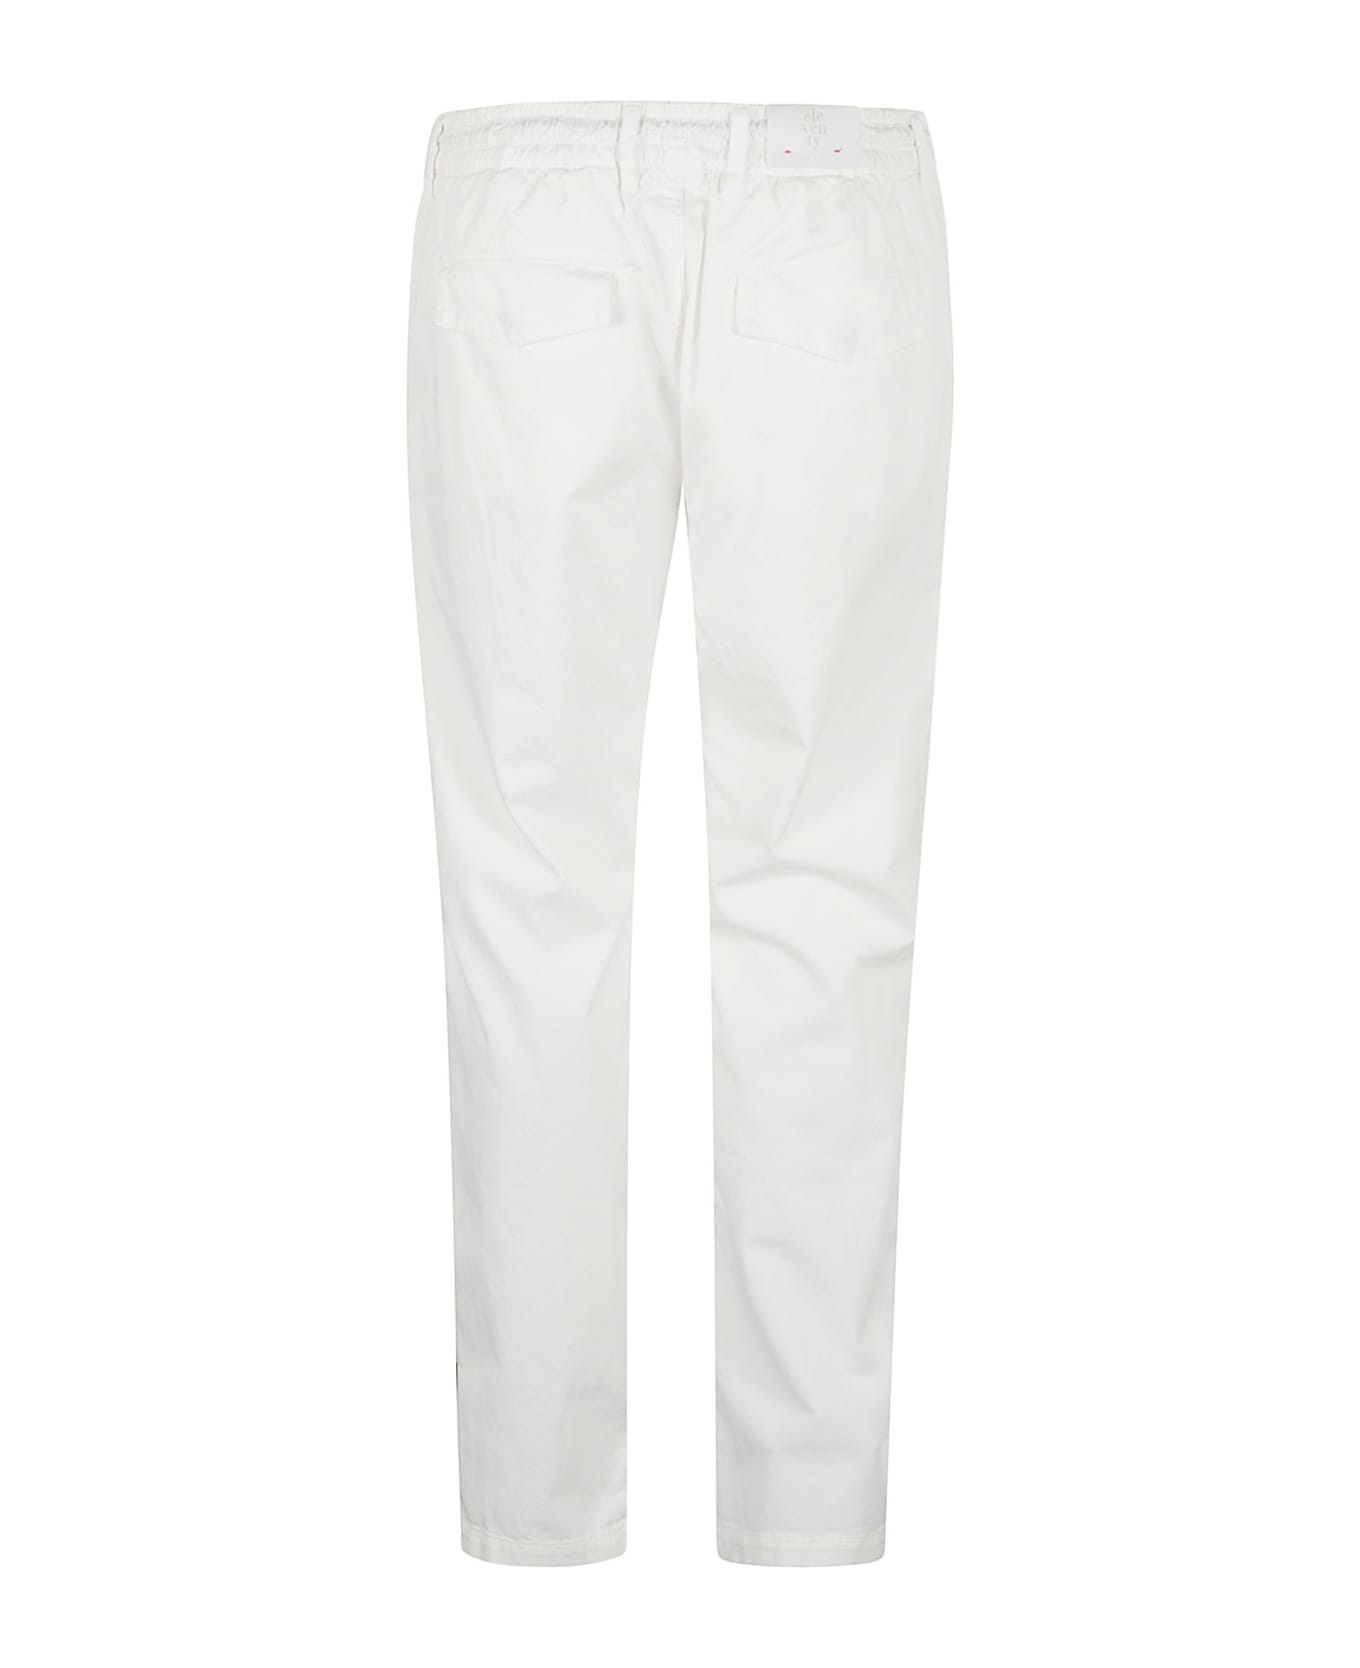 Eleventy Drawstringed Buttoned Trousers - White ボトムス